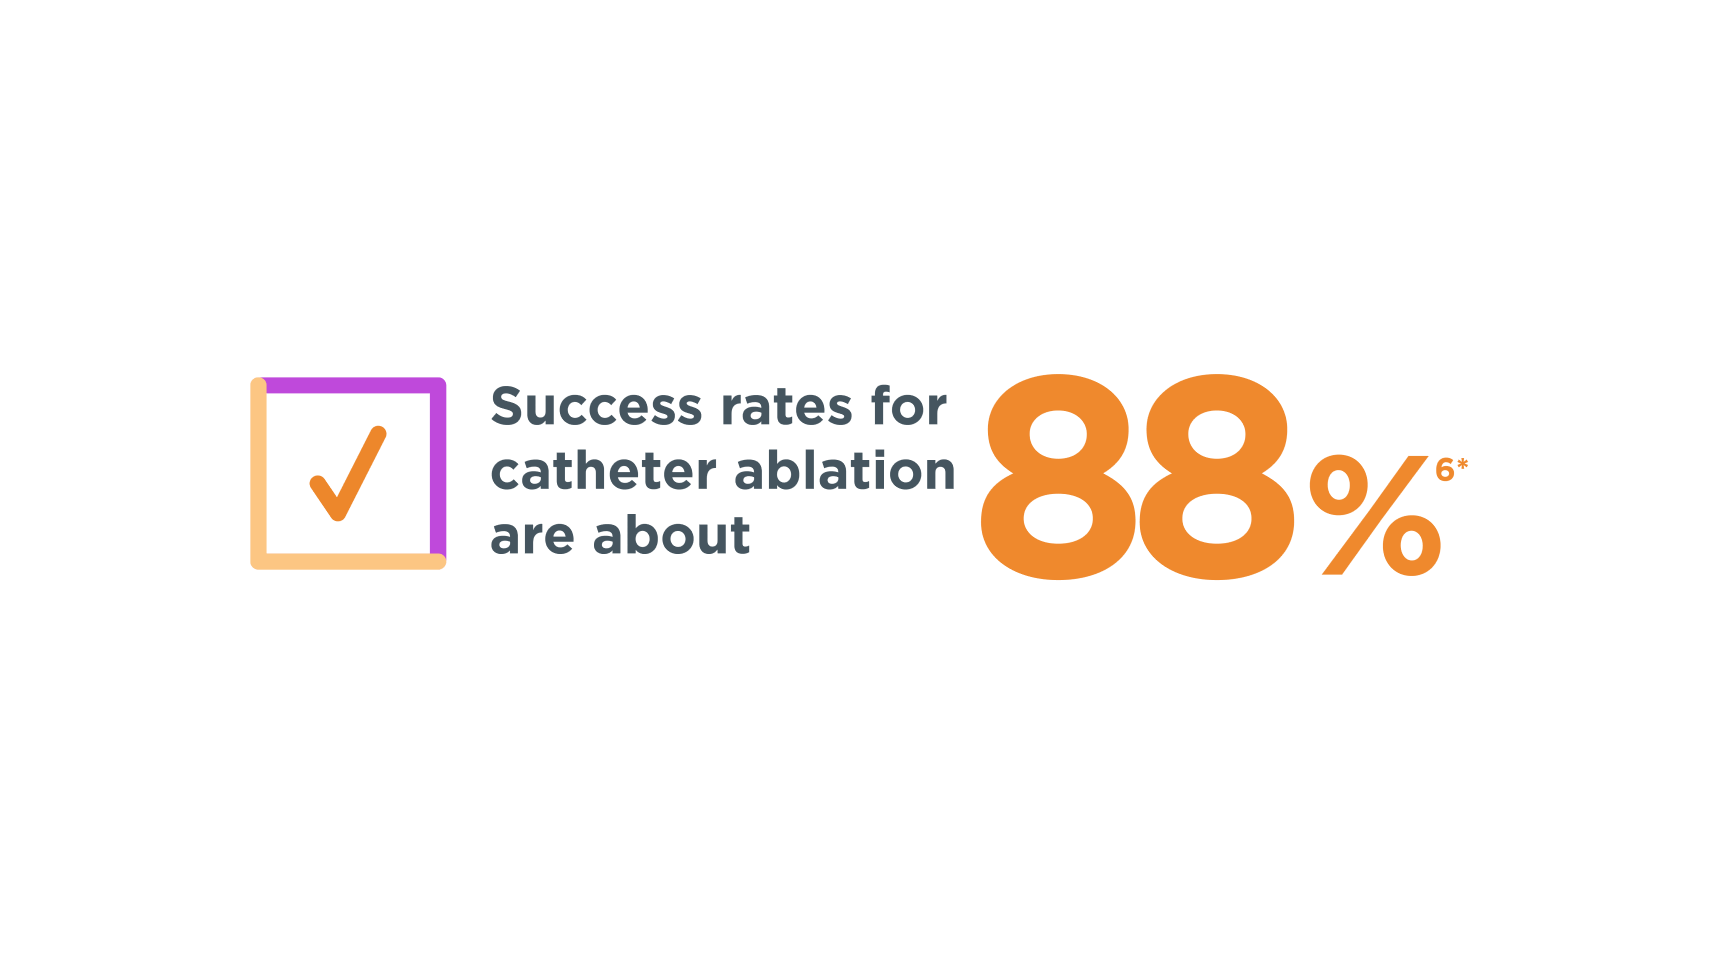 Success rates for catherer ablation are about 88%